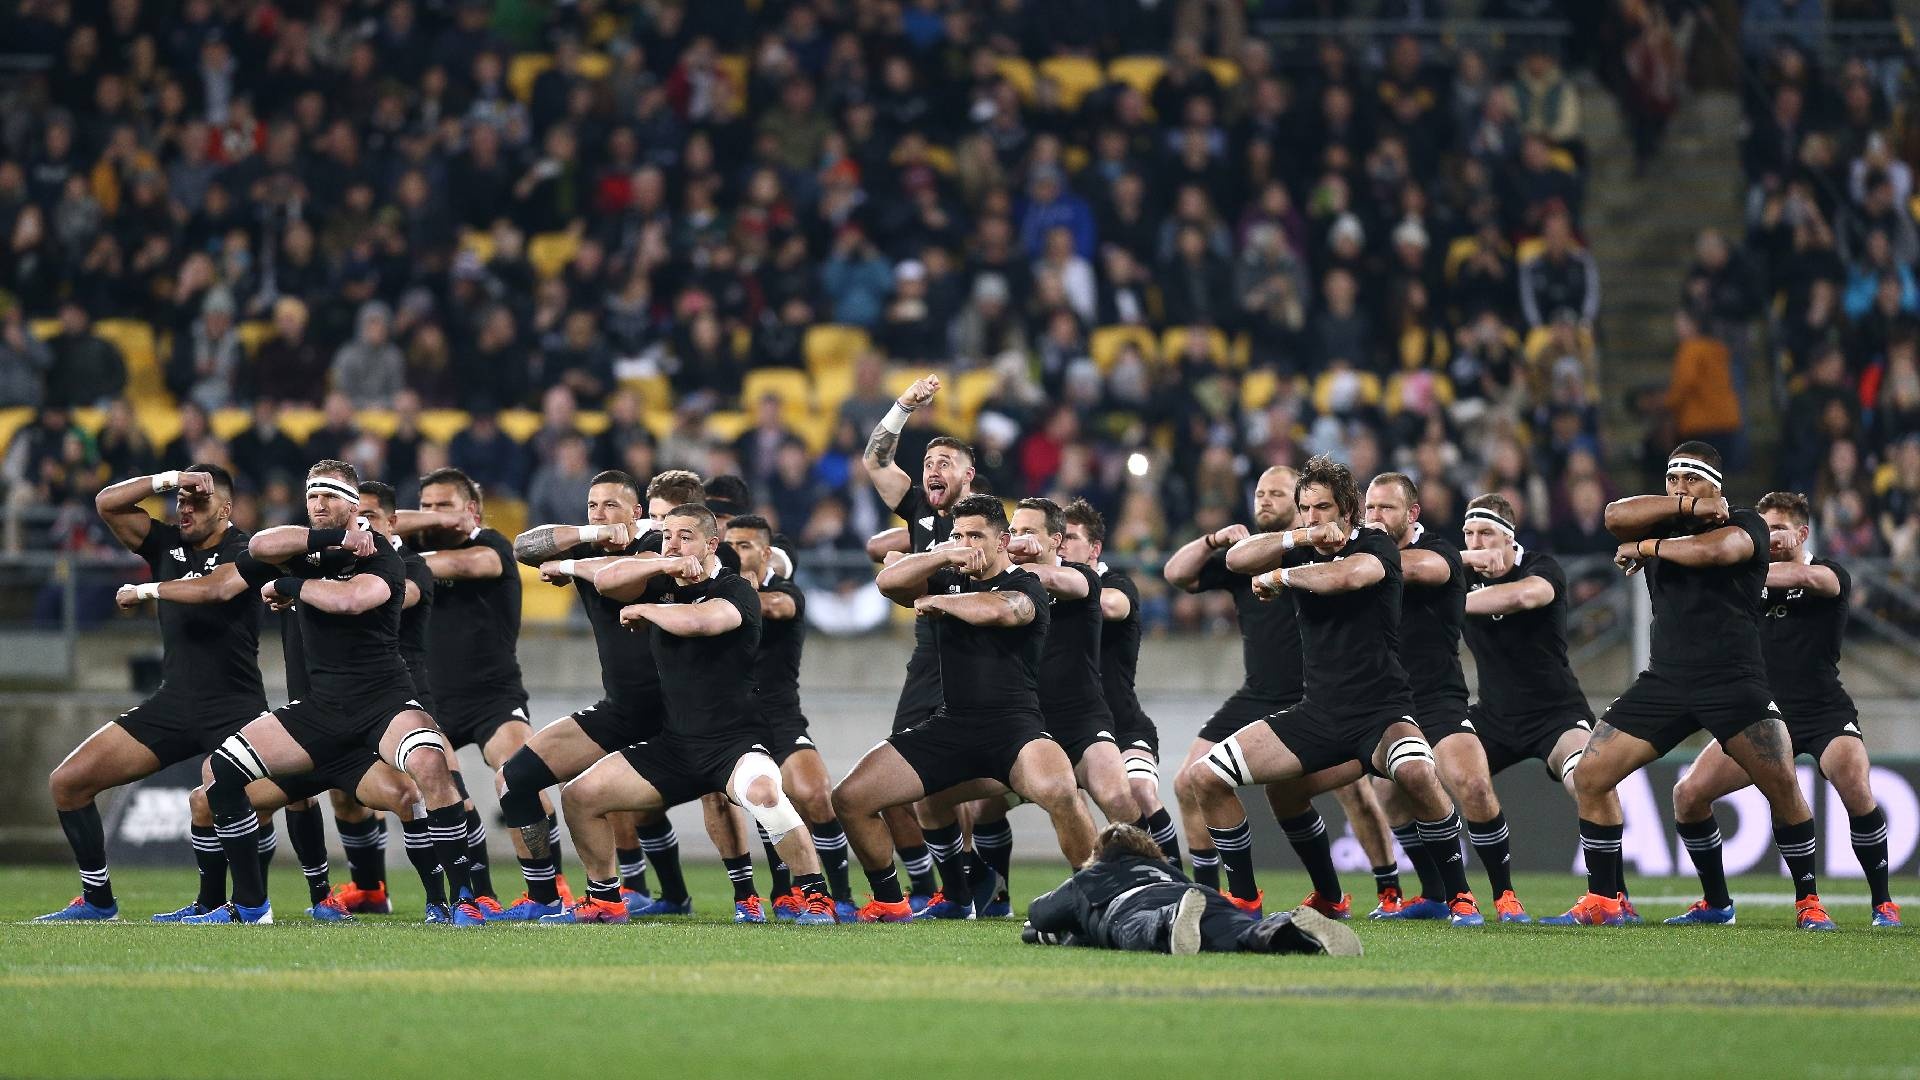 Rugby League: The All Blacks - The New Zealand national union team, Performance before the game starts. 1920x1080 Full HD Wallpaper.